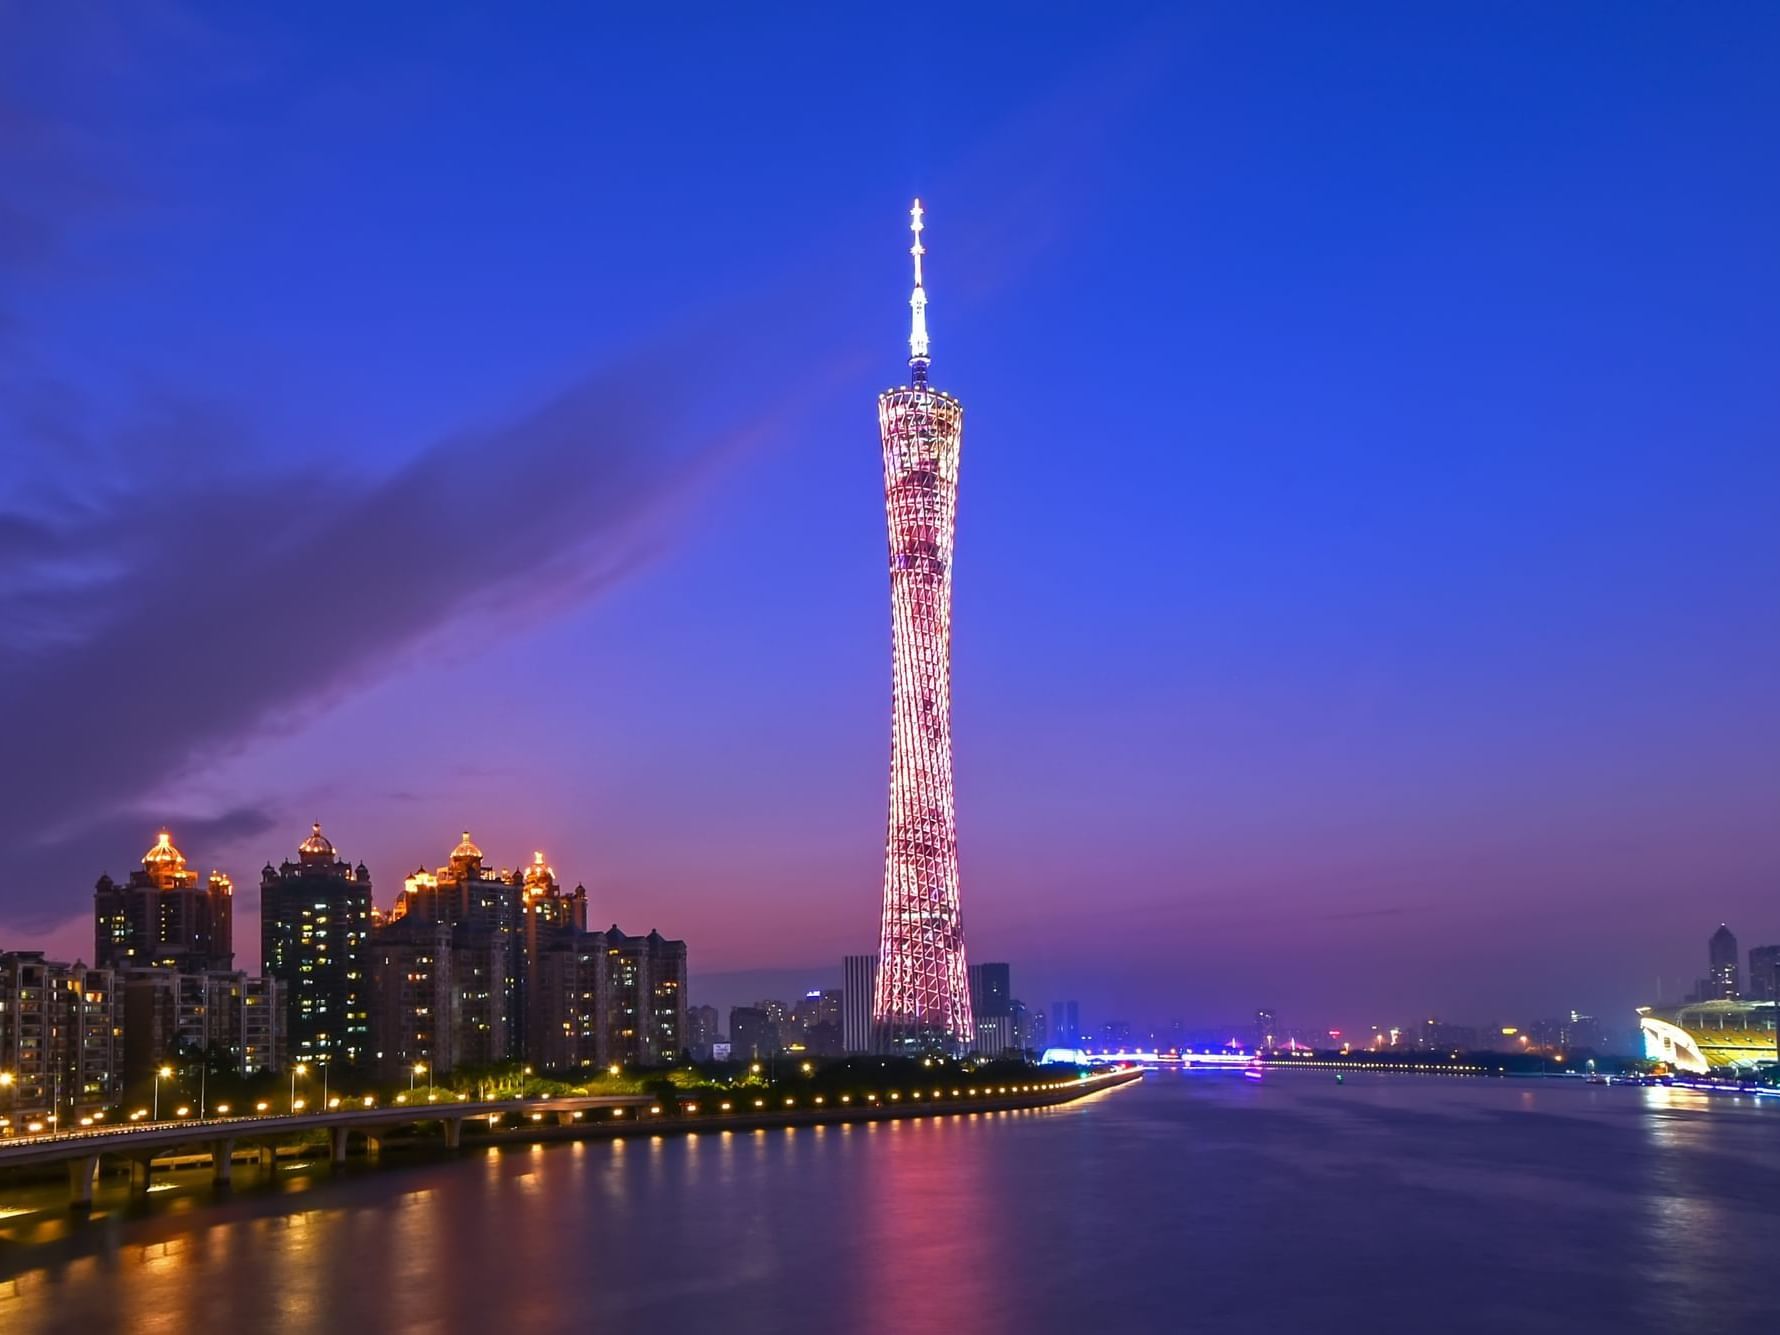 Distant view of the Guangzhou Tower near White Swan Hotel